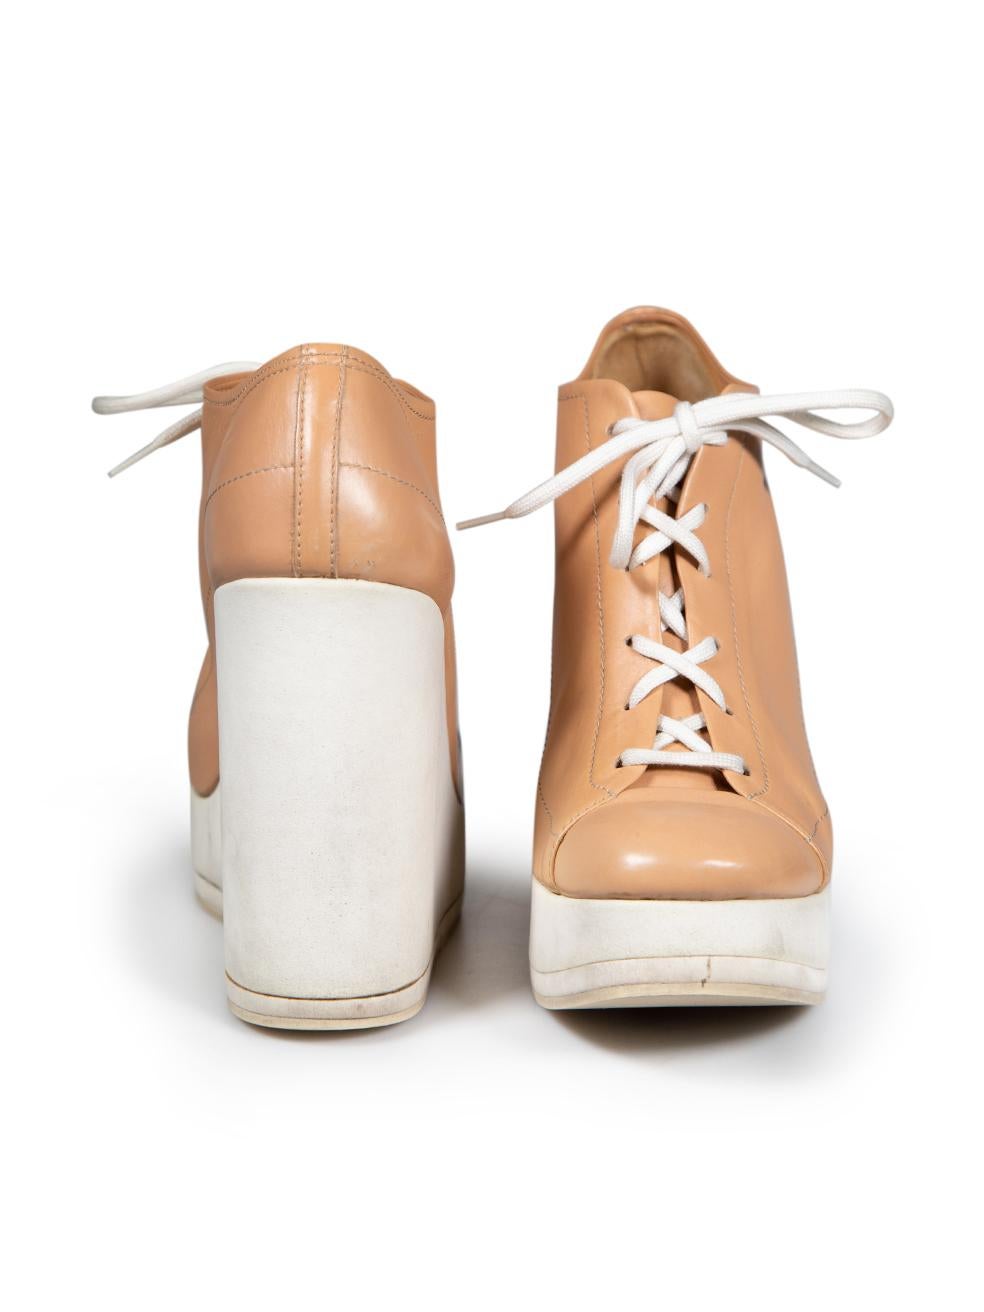 Jil Sander Beige Leather Lace Up Wedge Trainers Size IT 39.5 In Good Condition For Sale In London, GB